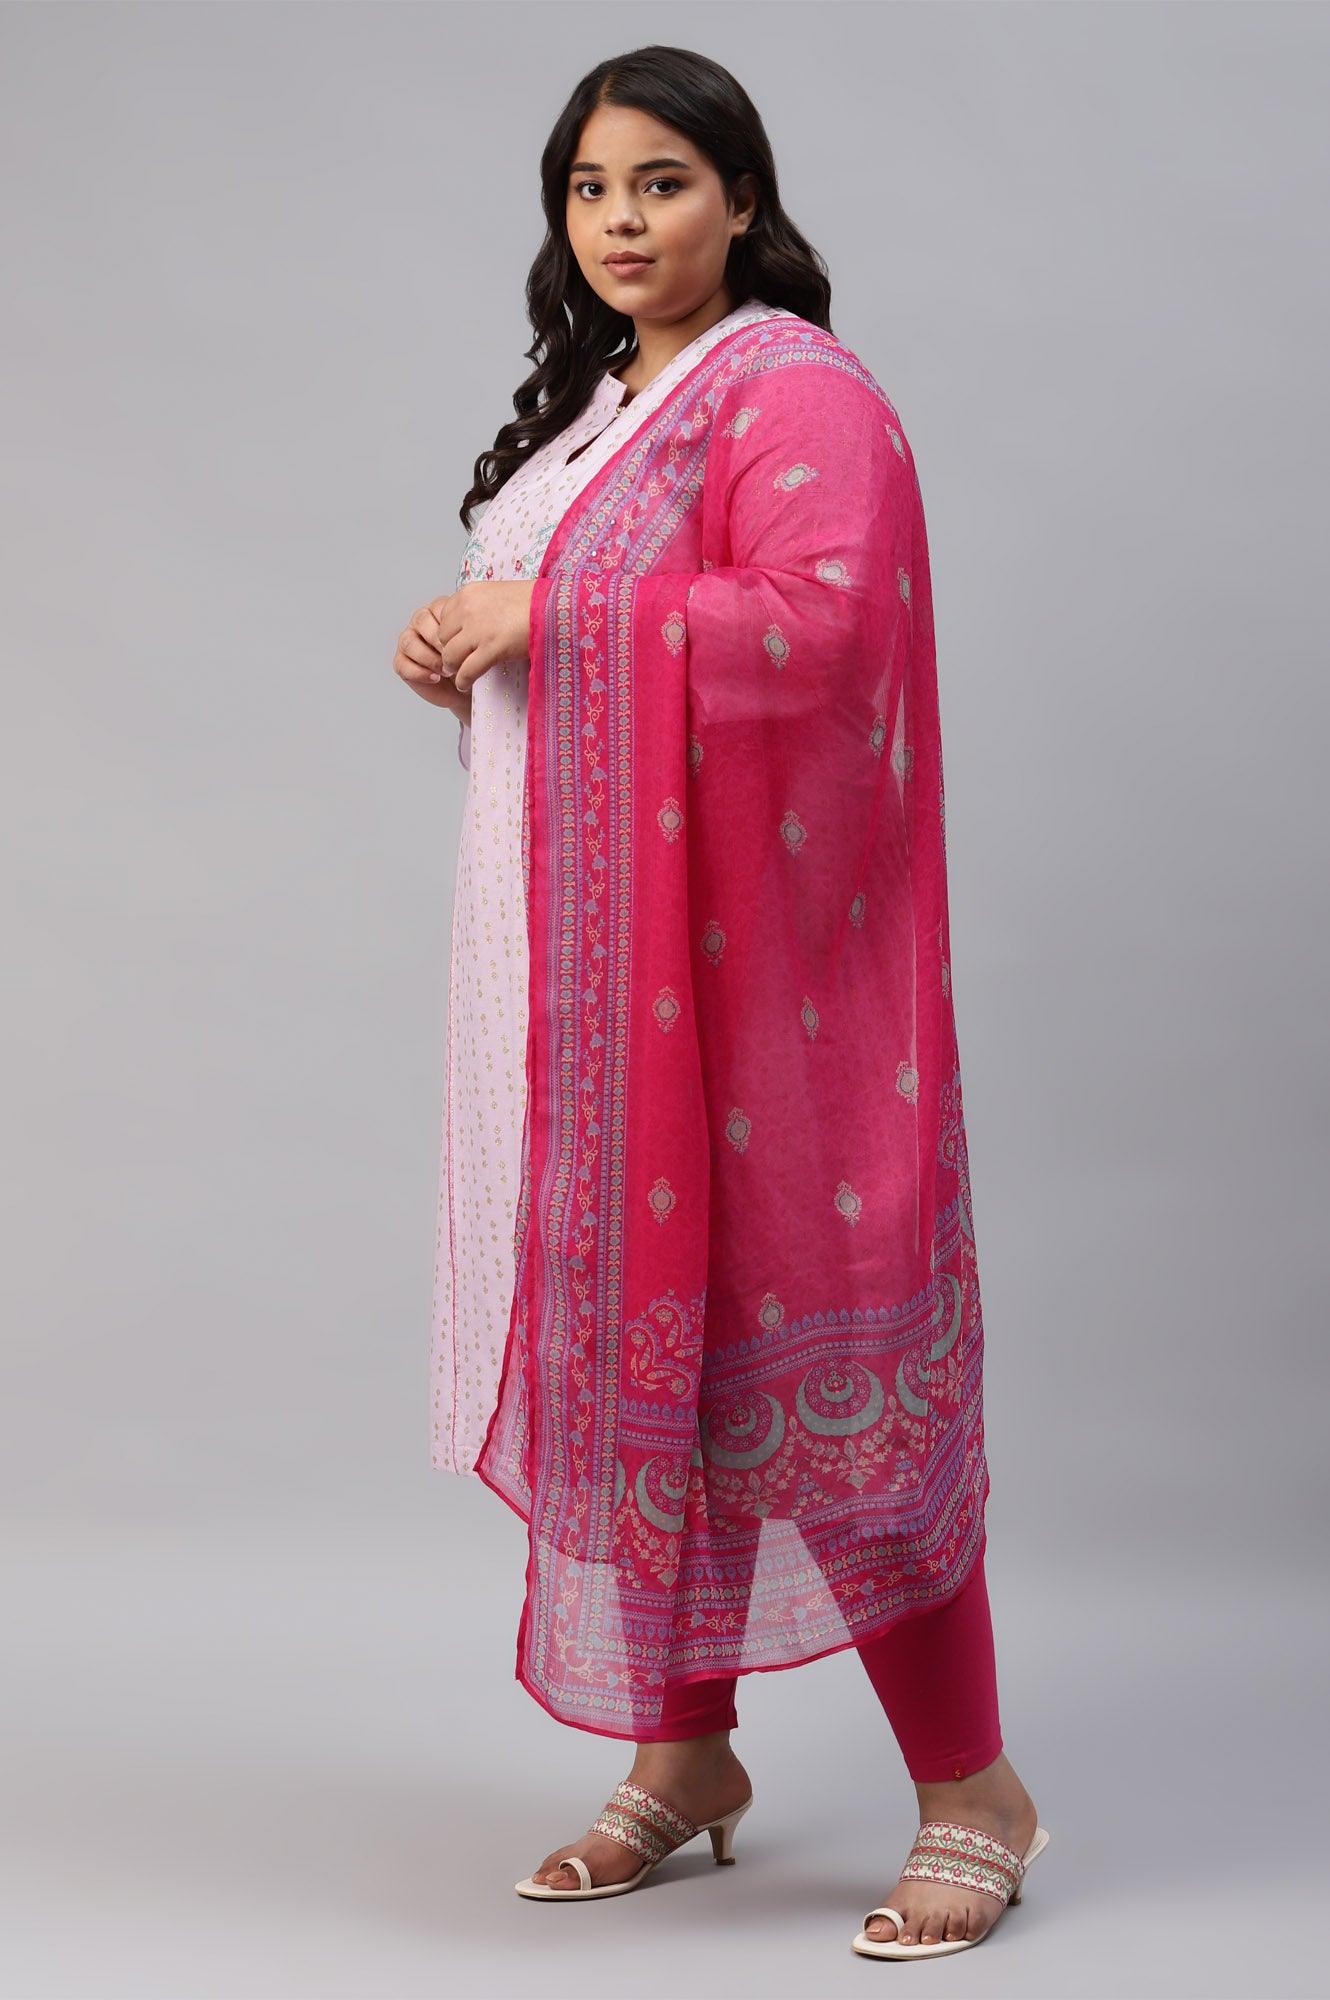 Plus Size Light Purple Embroidered kurta With Pink Tights And Printed Dupatta - wforwoman